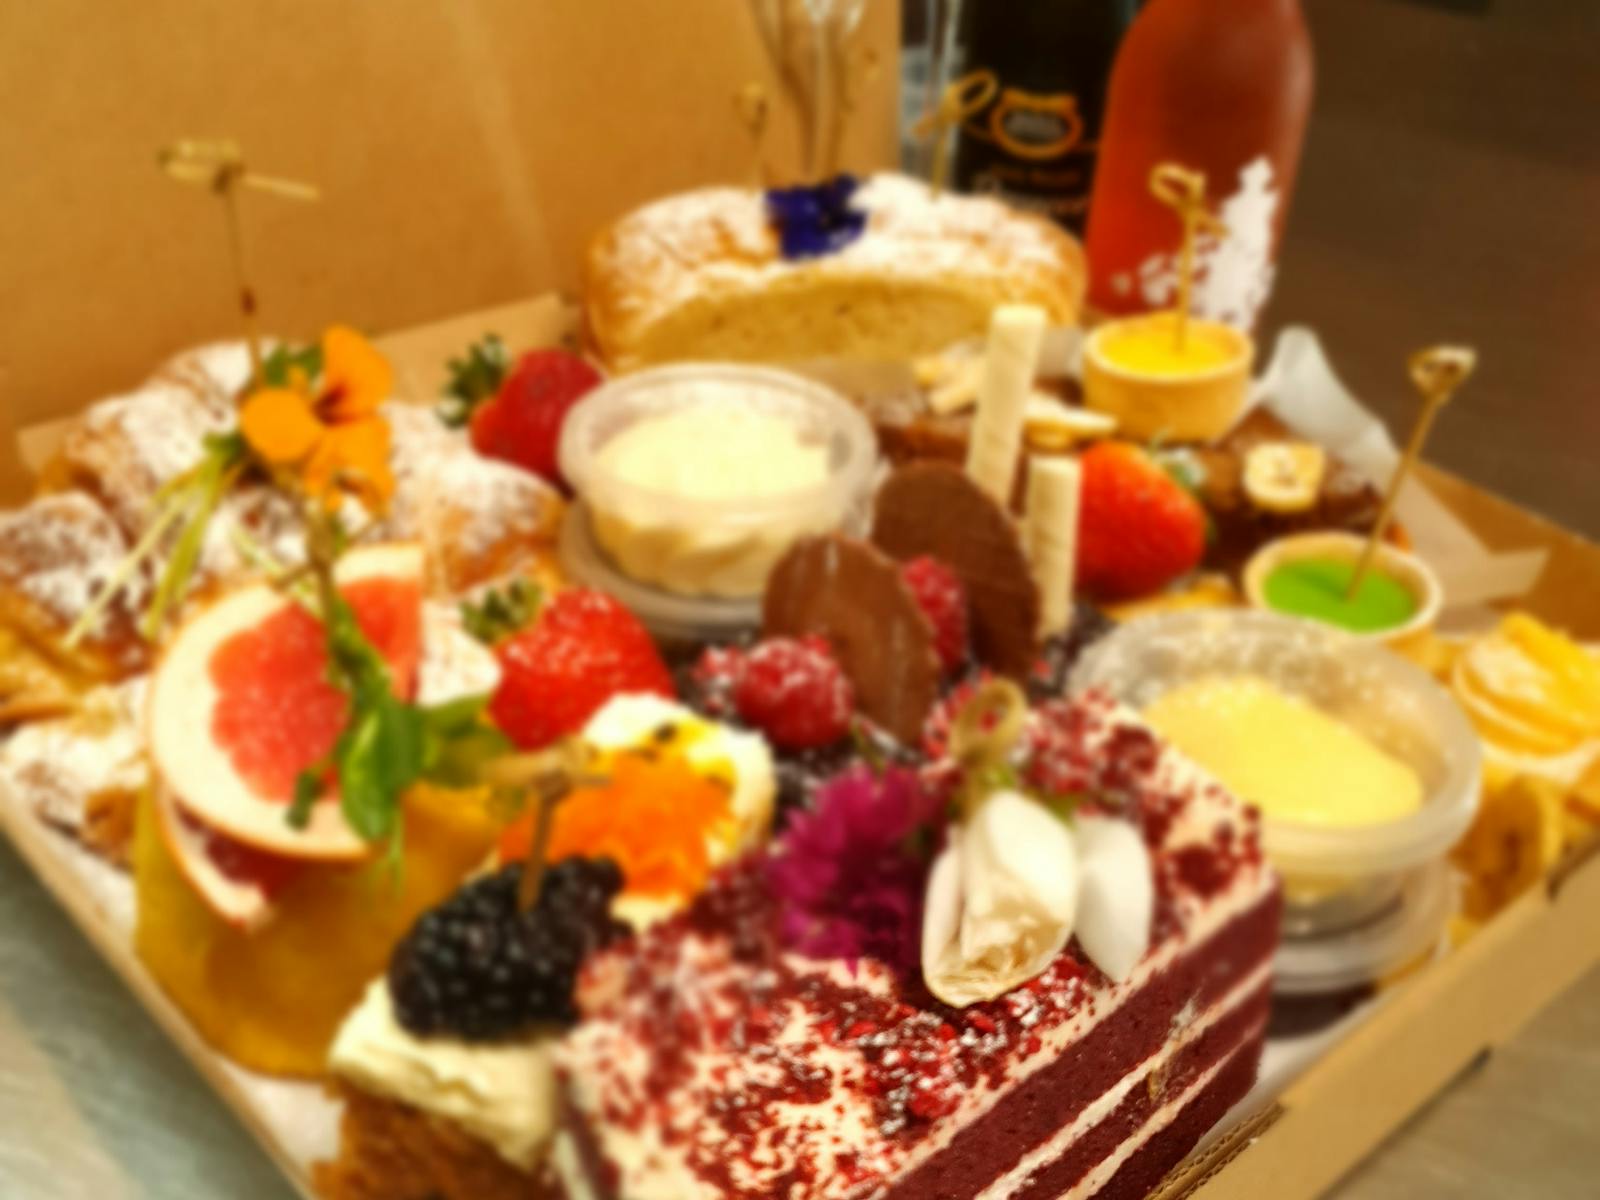 Rich velvety cake with a light citrus tart and famous scones paired with a Moscato or prosecco